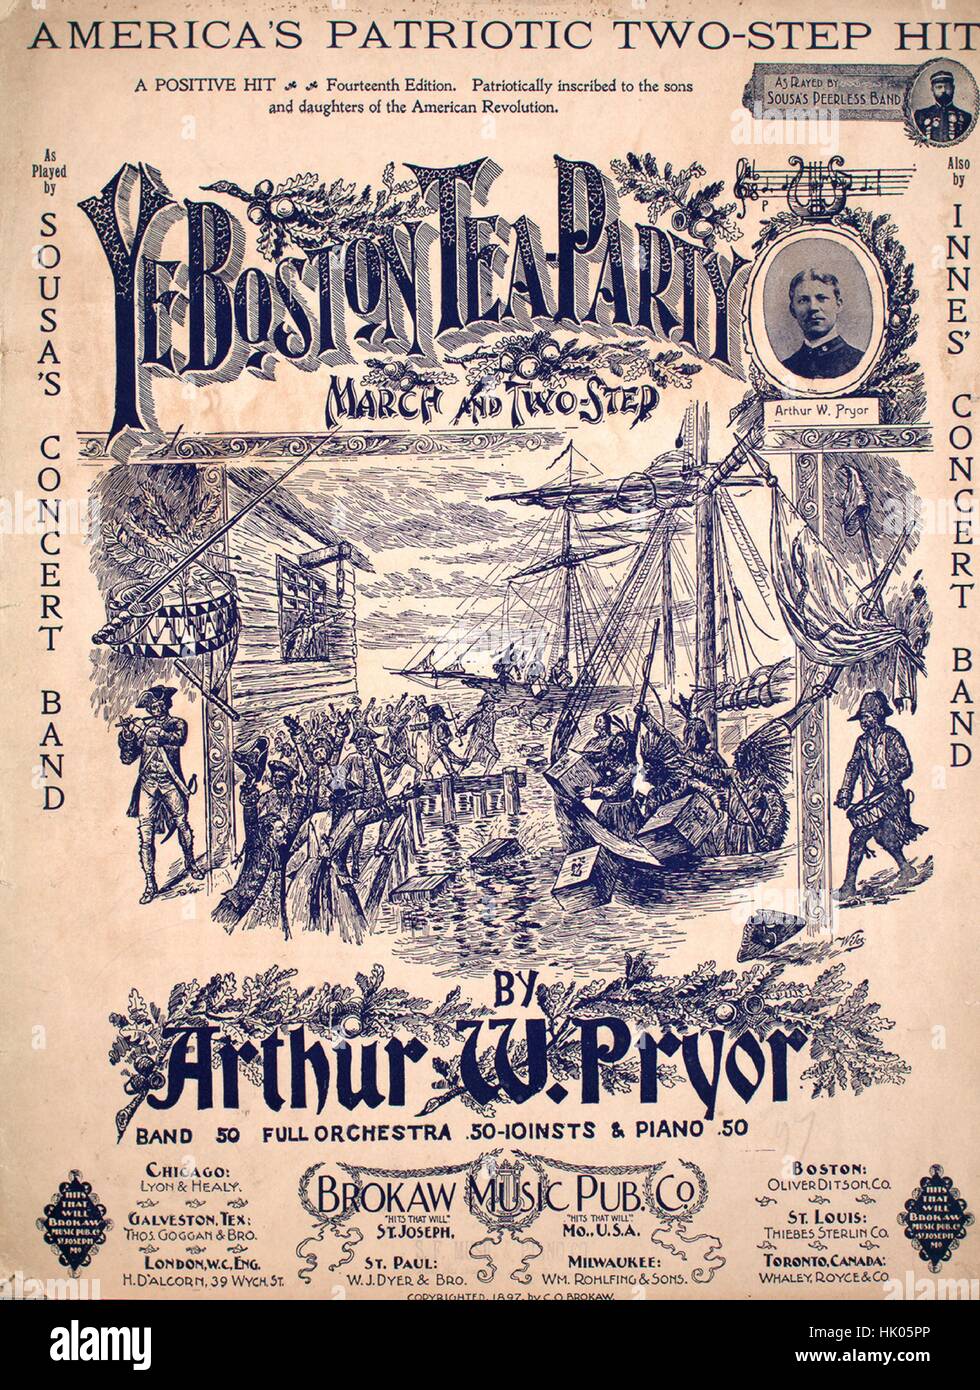 Sheet music cover image of the song 'Ye Boston Tea-Party March and Two-Step America's Patriotic Two-Step Hit', with original authorship notes reading 'By Arthur W Pryor', 1897. The publisher is listed as 'Brokaw Music Pub. Co.', the form of composition is 'sectional', the instrumentation is 'piano', the first line reads 'None', and the illustration artist is listed as 'Wike'. Stock Photo